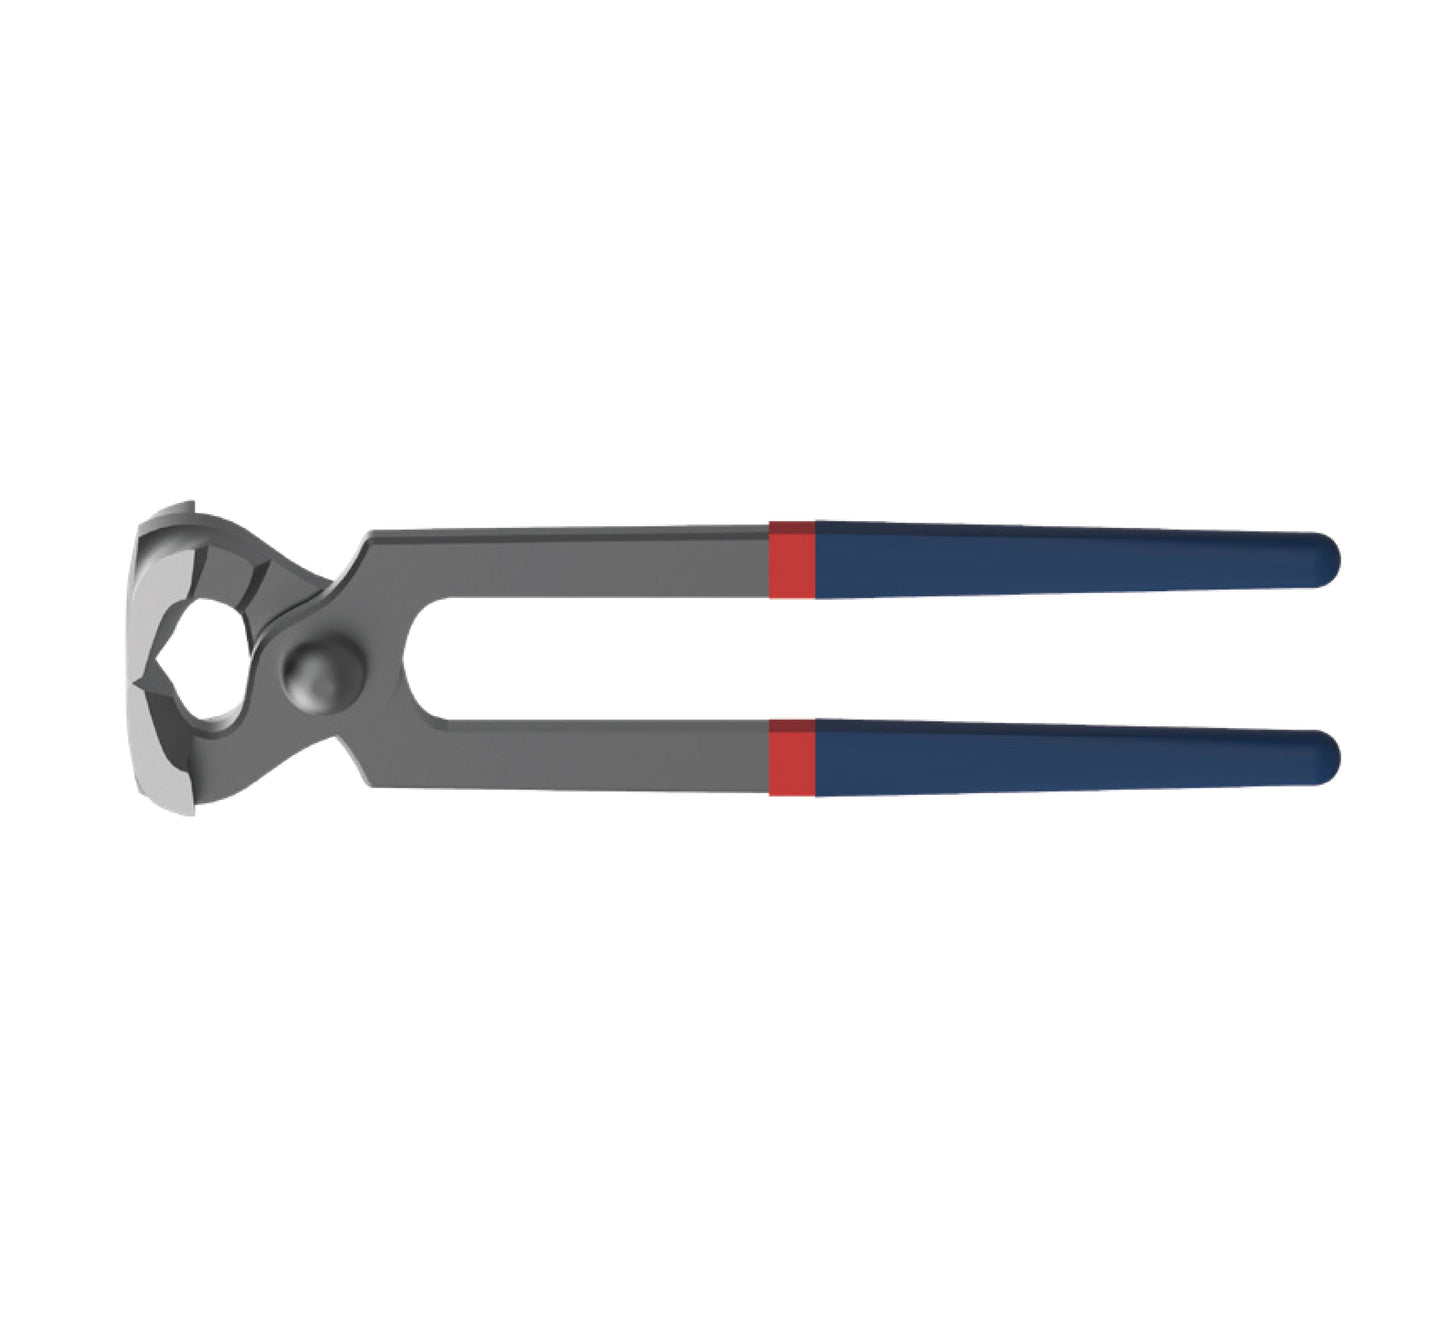 APT CARPENTER PINCER 8" POLISH/ RED BLUE HANDLE-NEW APT PP CARD WITH RED STRAP AH1231240-8